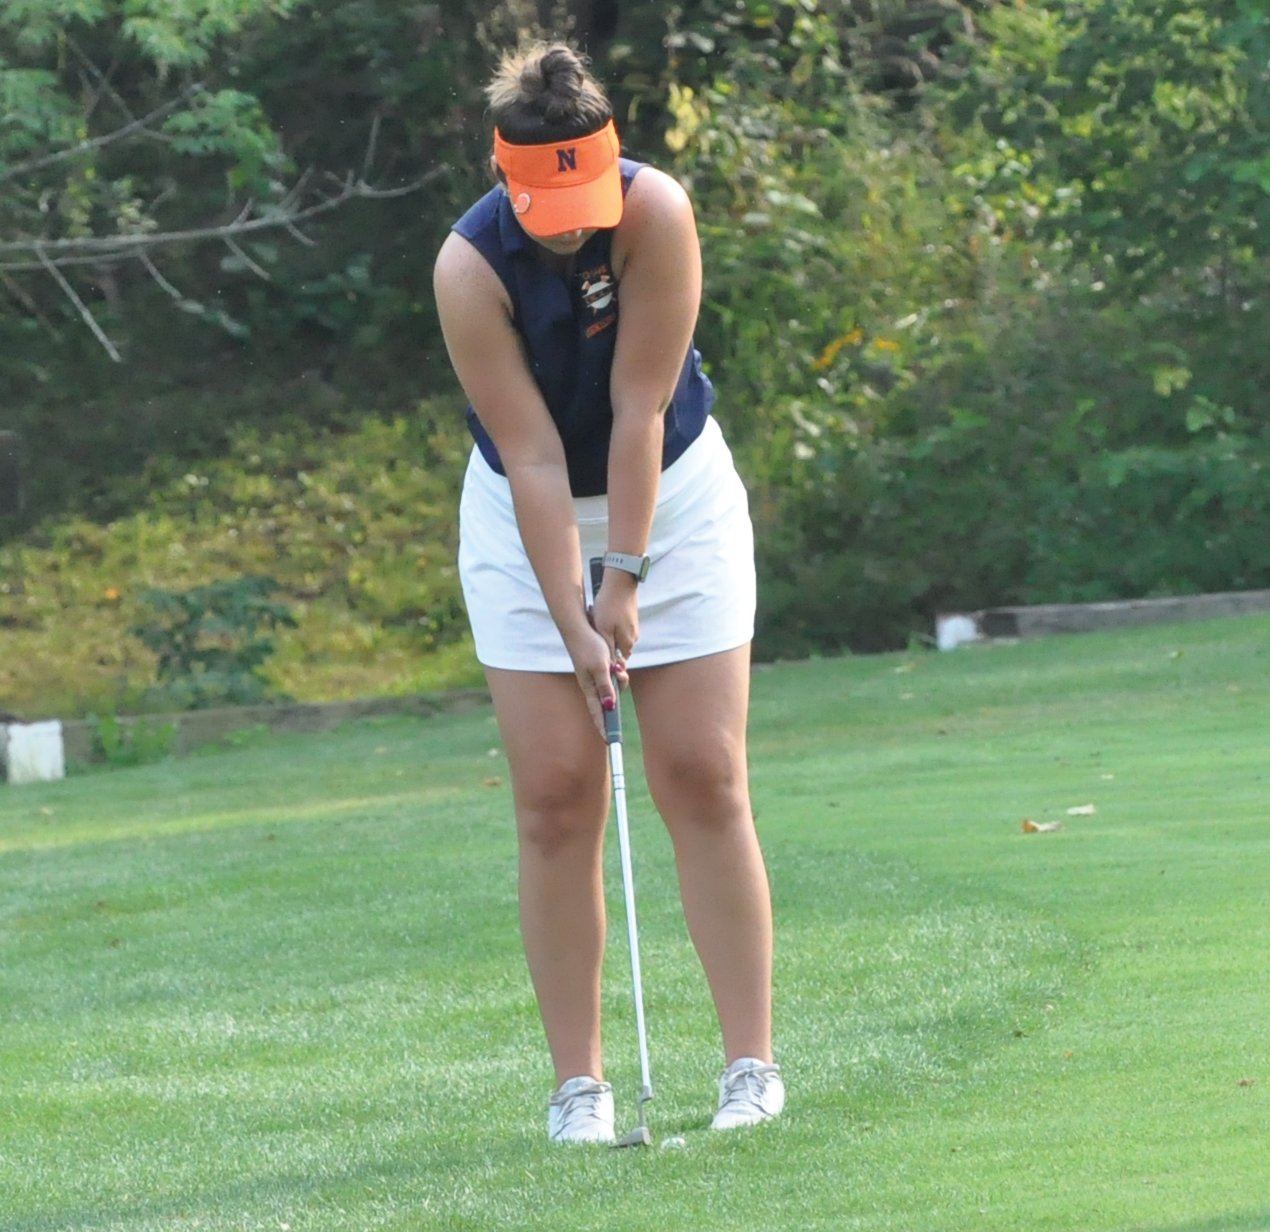 North Montgomery's Rylie Koopman lines up a putt on No. 3 at Rocky Ridge on Monday.